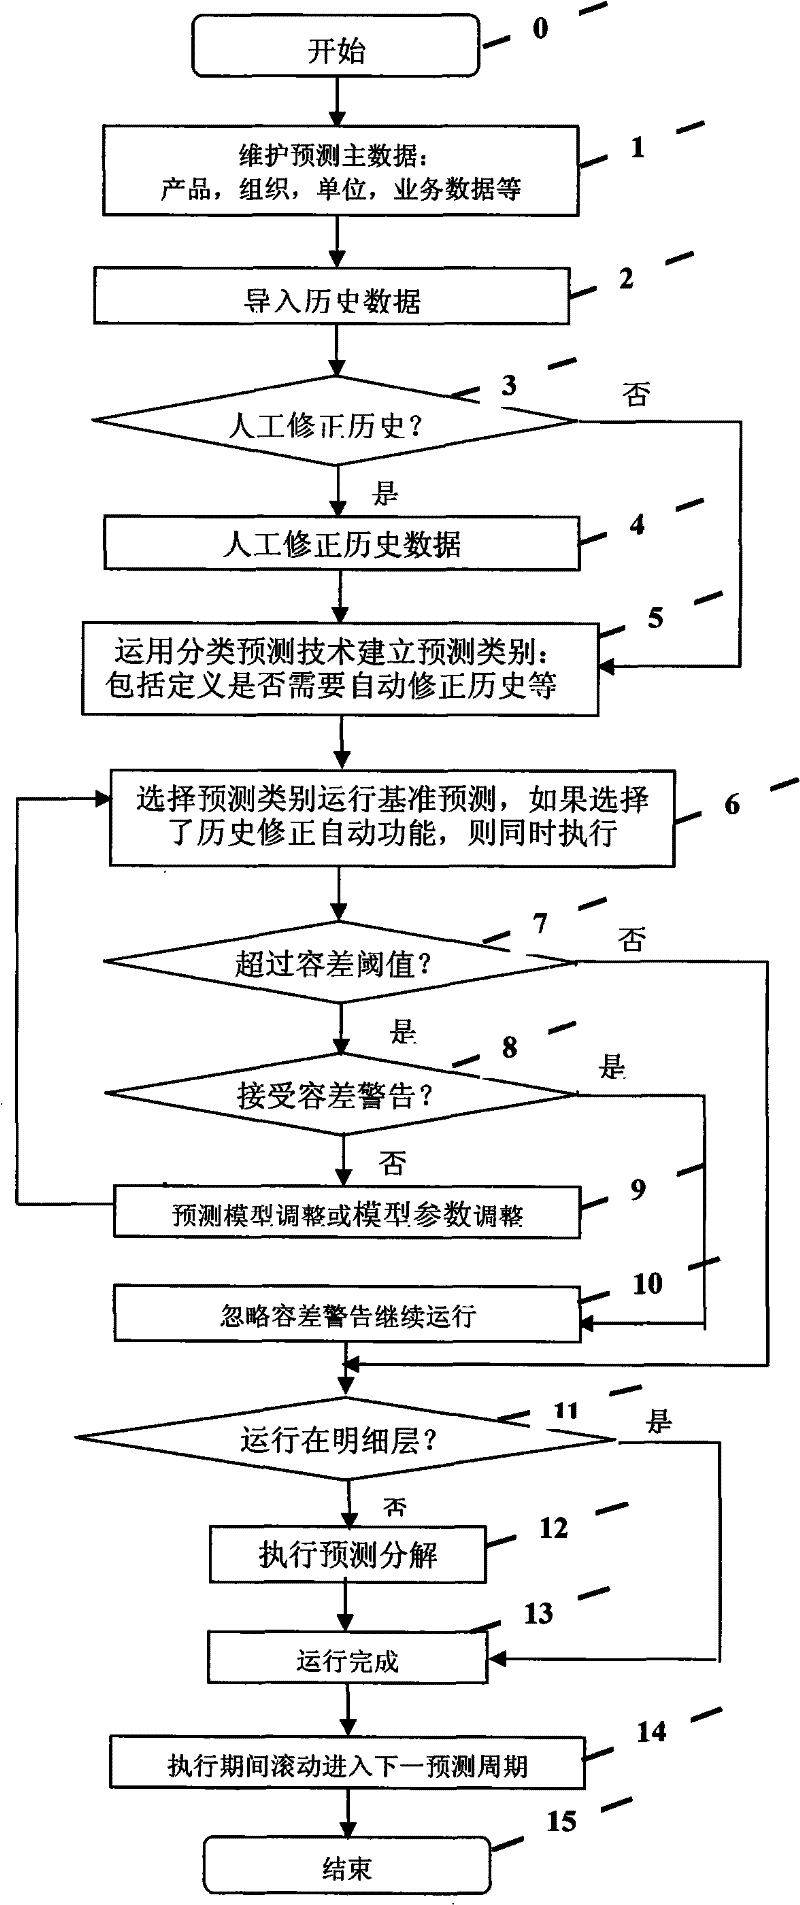 Sales forecasting system and method